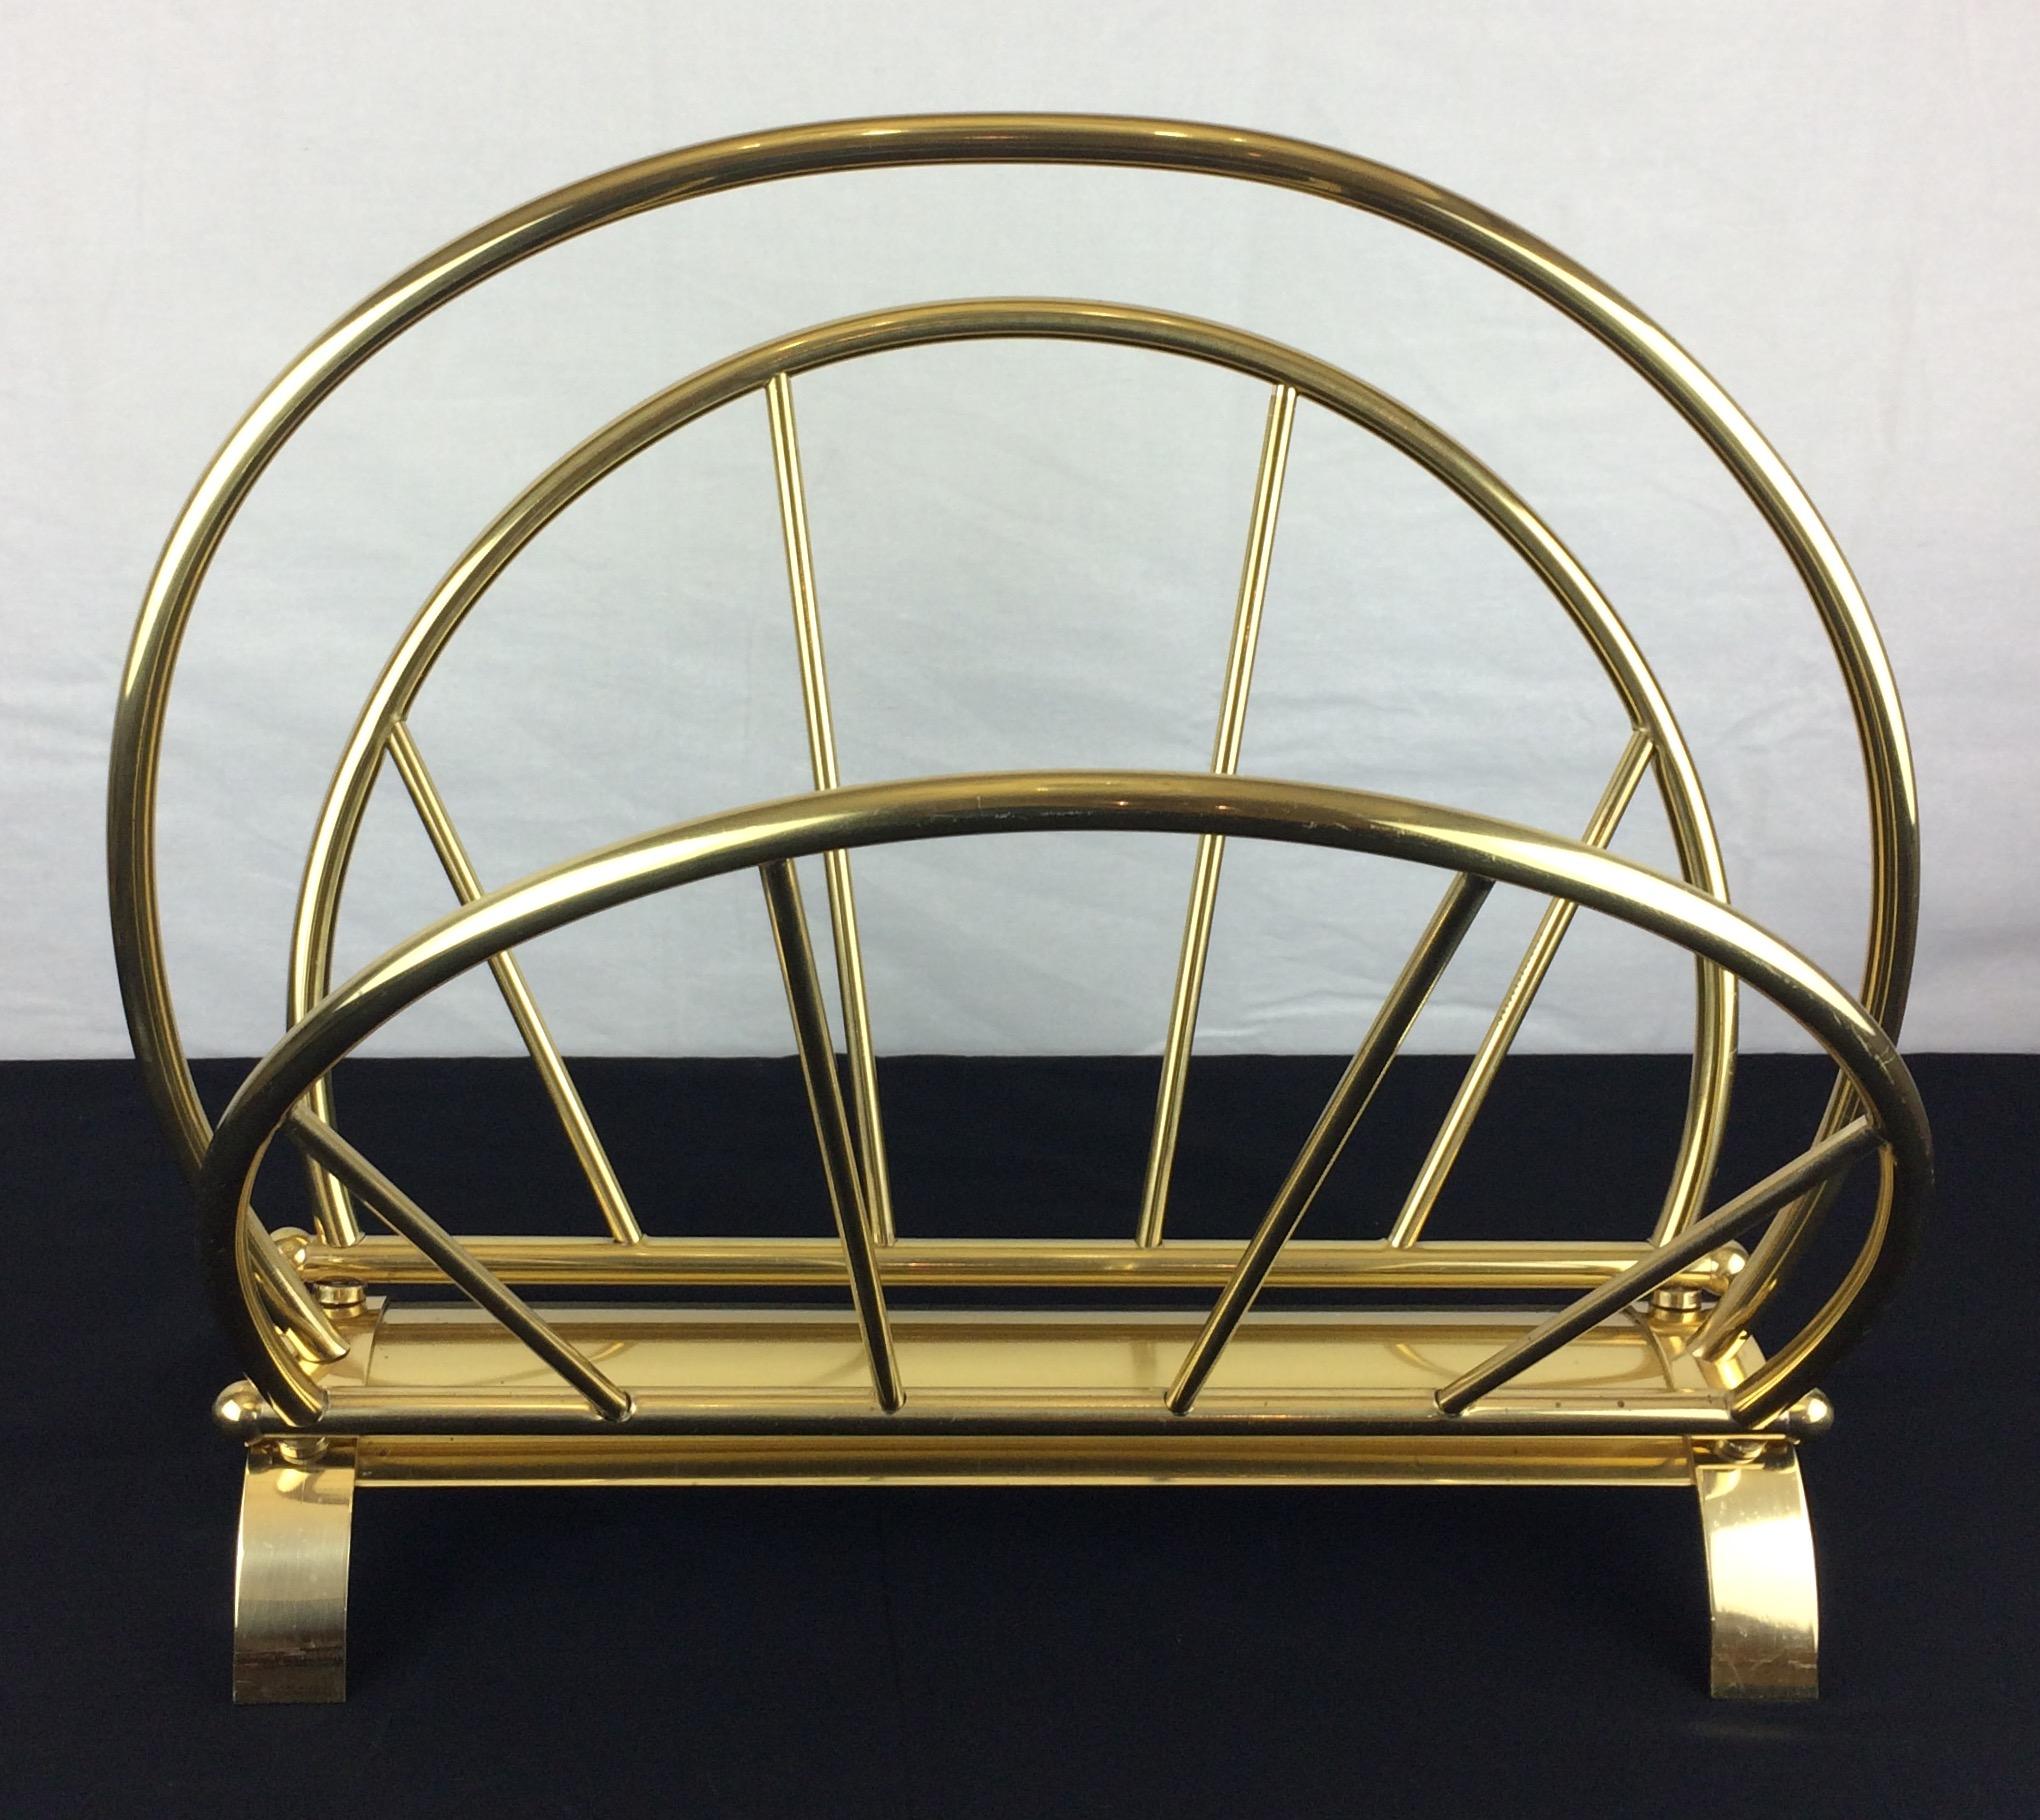 This vintage French magazine or newspaper rack was produced in the 1970s-1980s and is made of solid brass.

Very good condition — This item has no defects, but it may show slight traces of use. Patina consistent with age and use.

Materials: